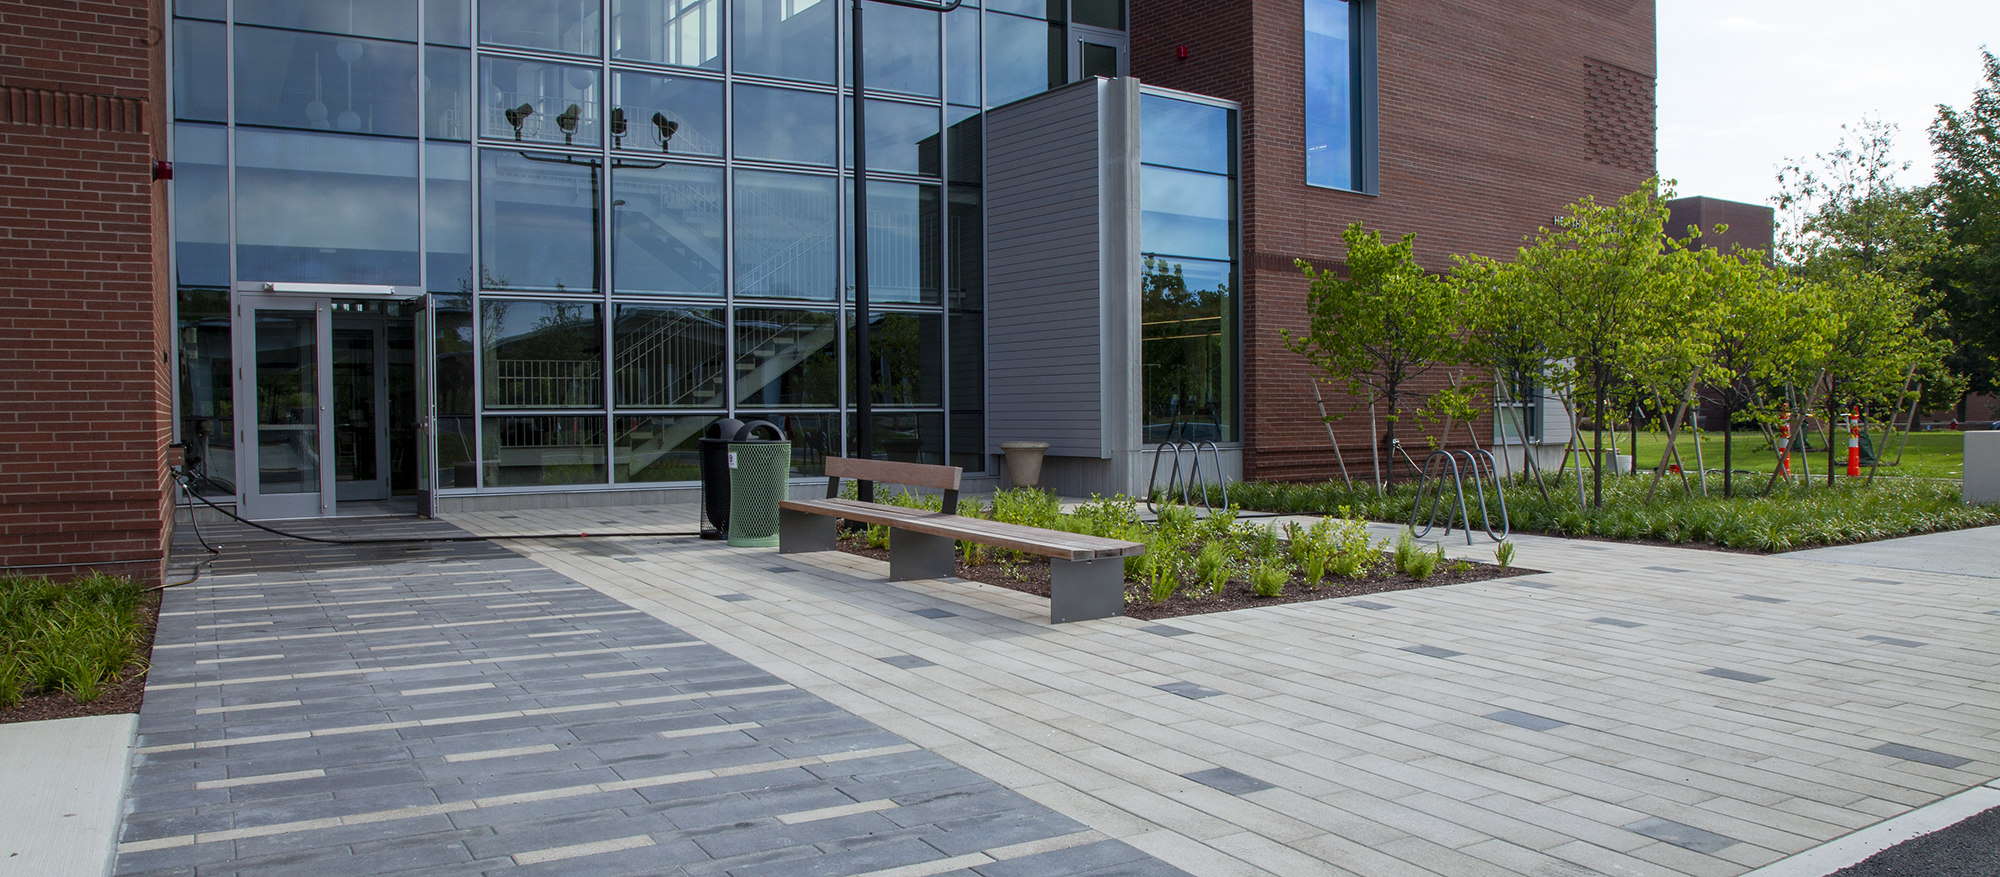 Bristol Community College has entrances paved with Promenade Plank Pavers, in block and dash patterns in contrasting colors.